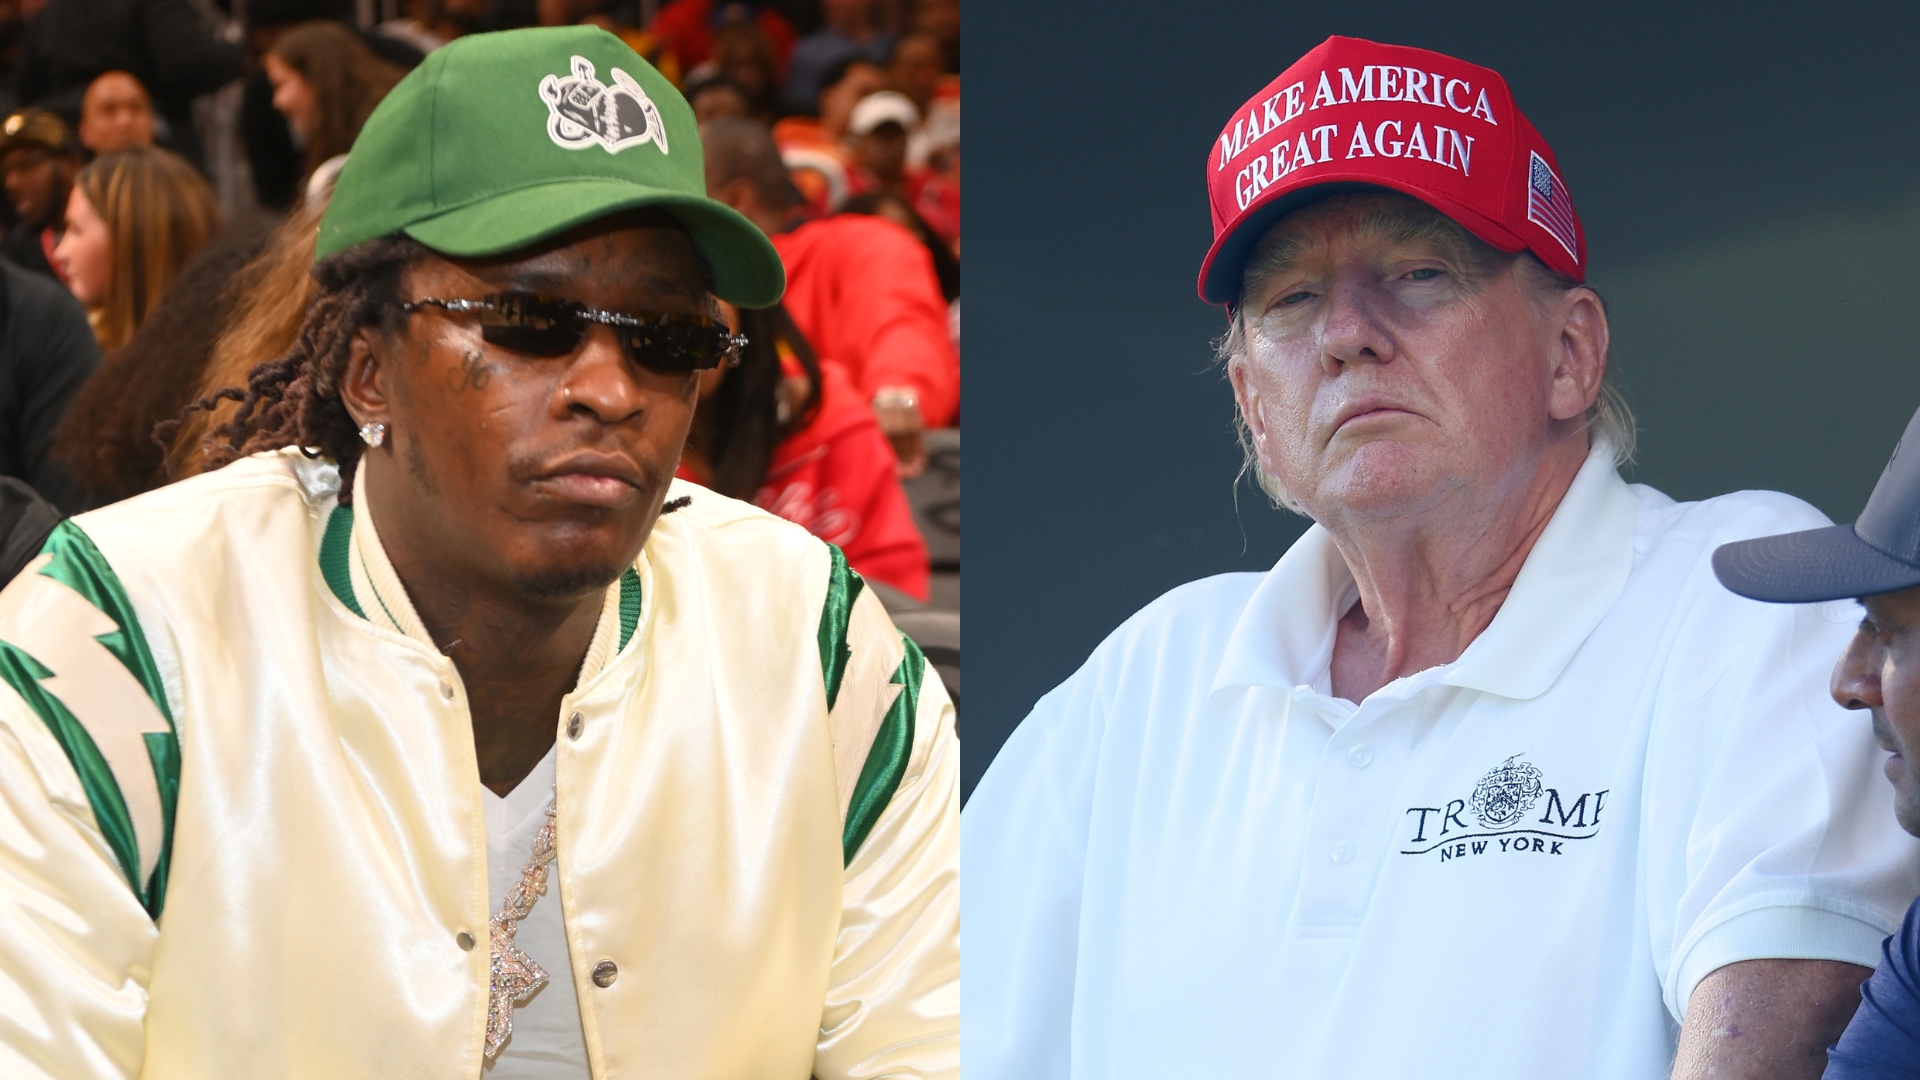 Young Thug & Donald Trump Indicted On RICO Charges By The Same District Attorney